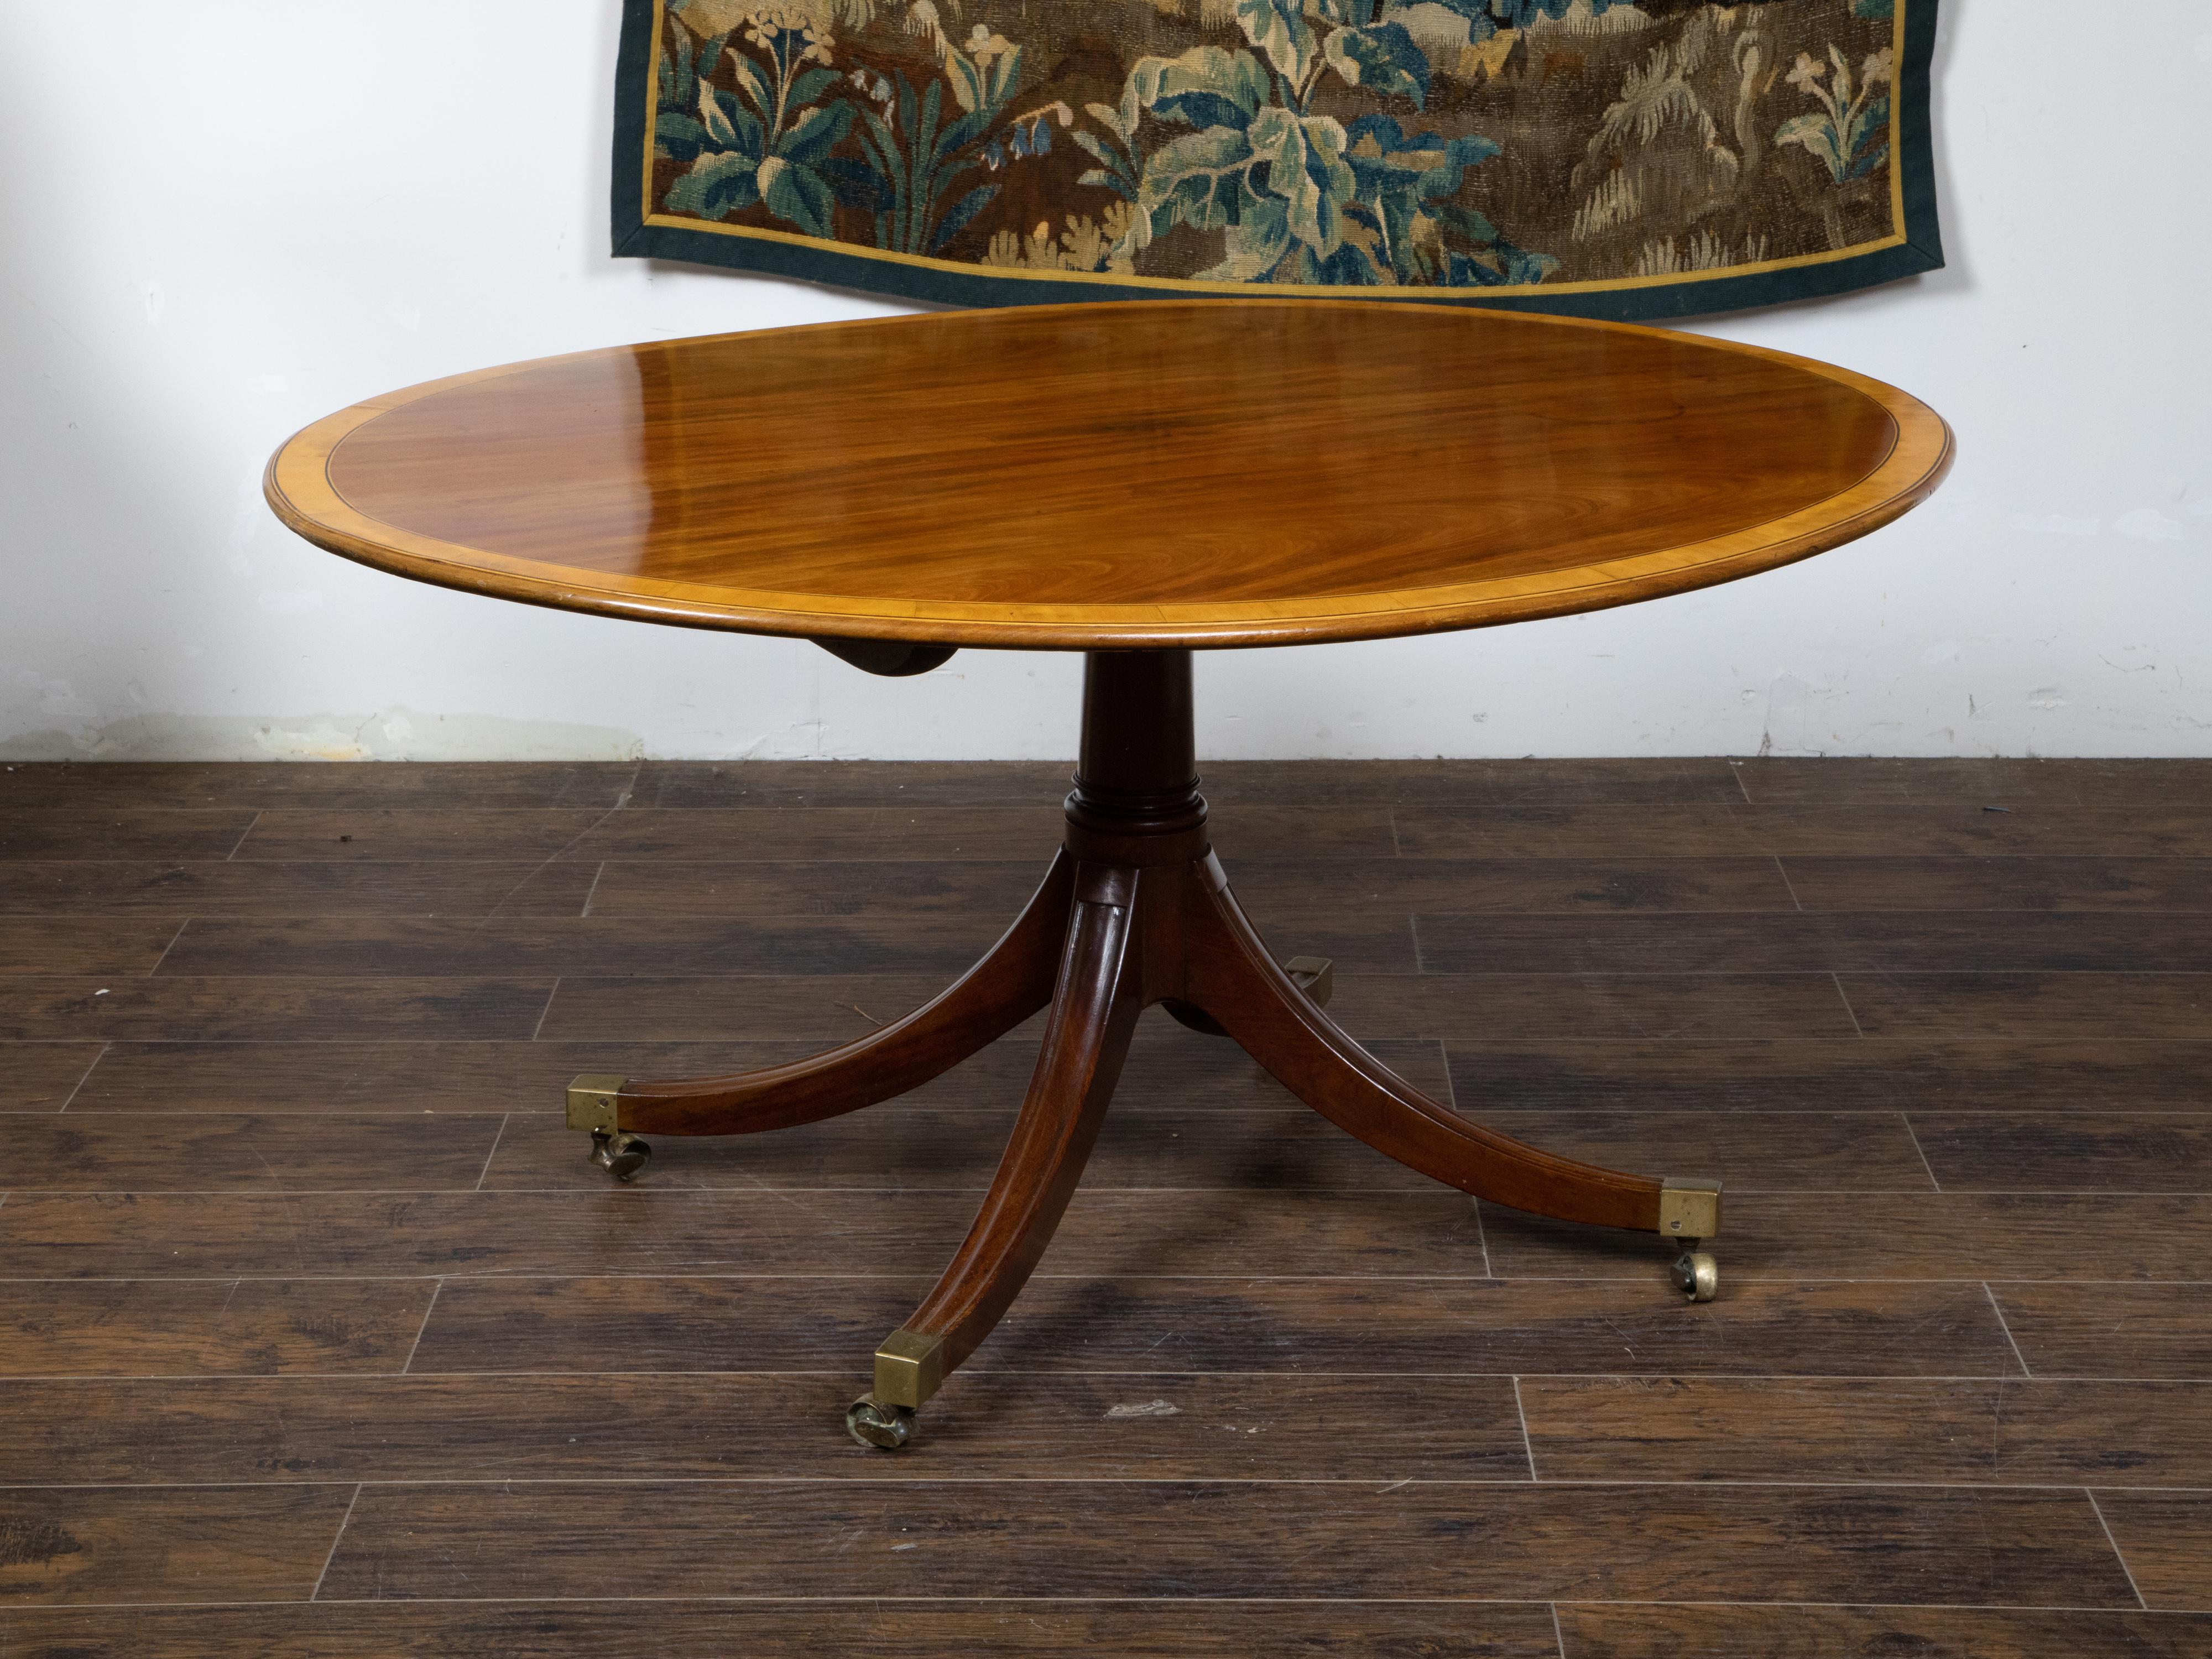 English Mahogany 1840s Oval Top Pedestal Table with Quadripod Base and Casters In Good Condition For Sale In Atlanta, GA